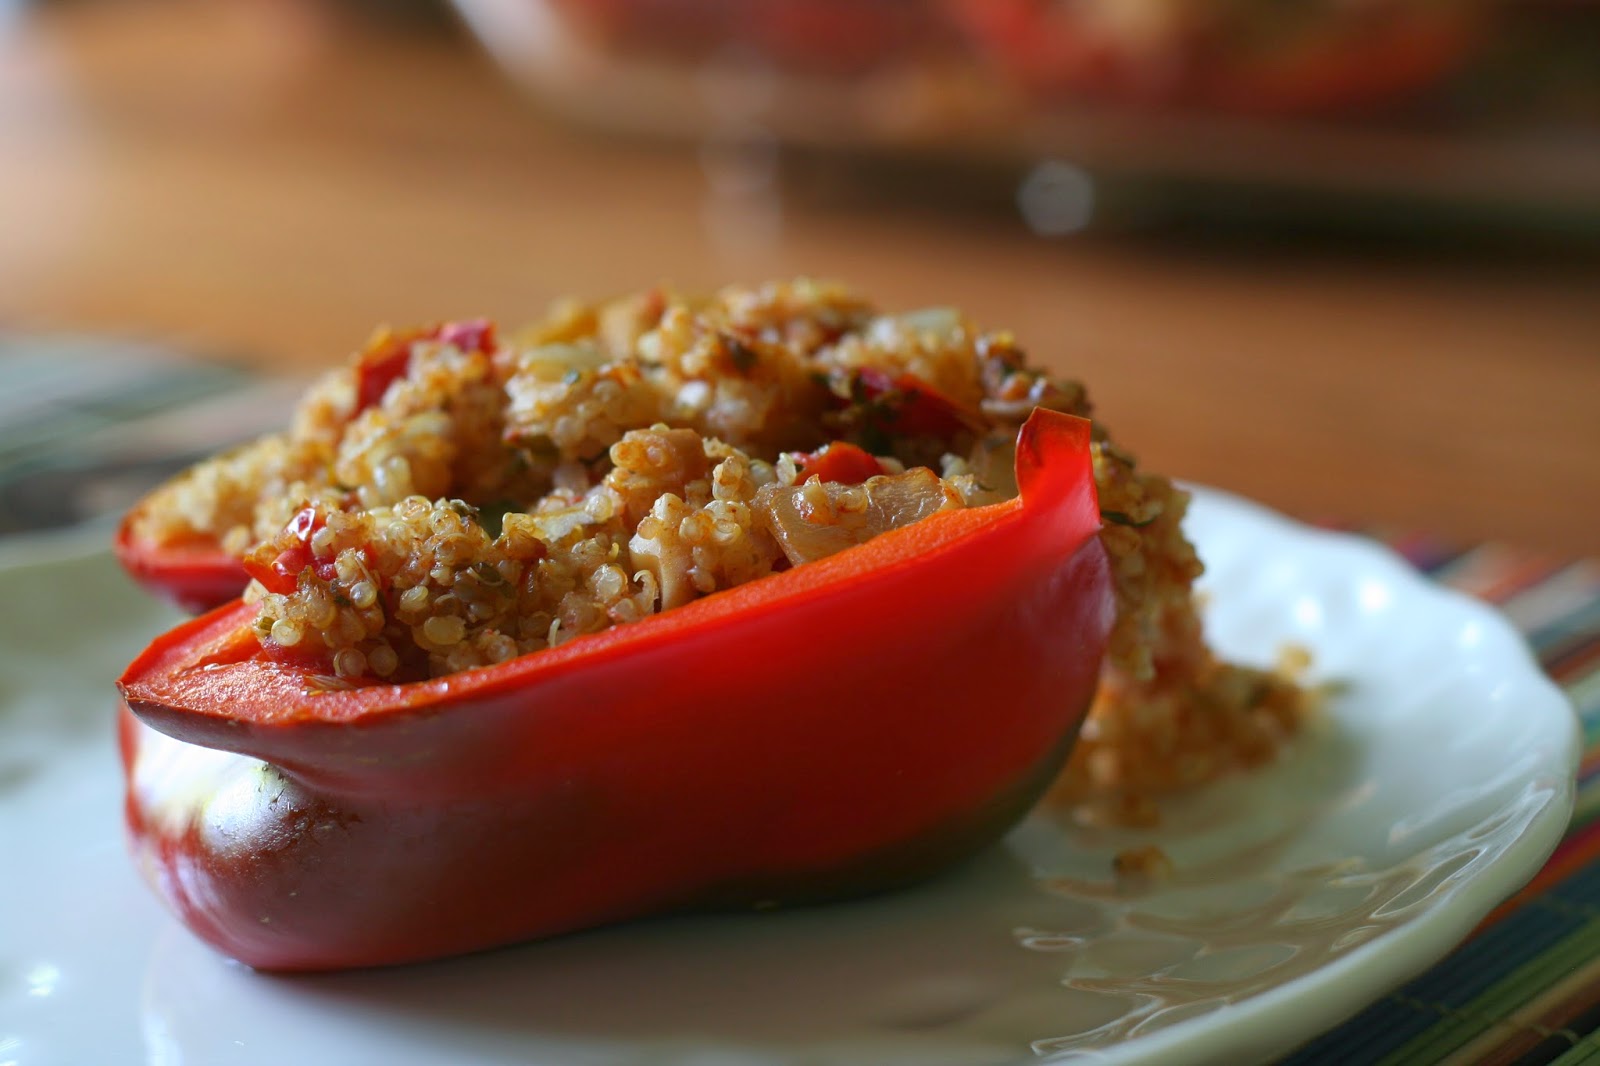 Copycat stouffer's stuffed peppers Cook and Post